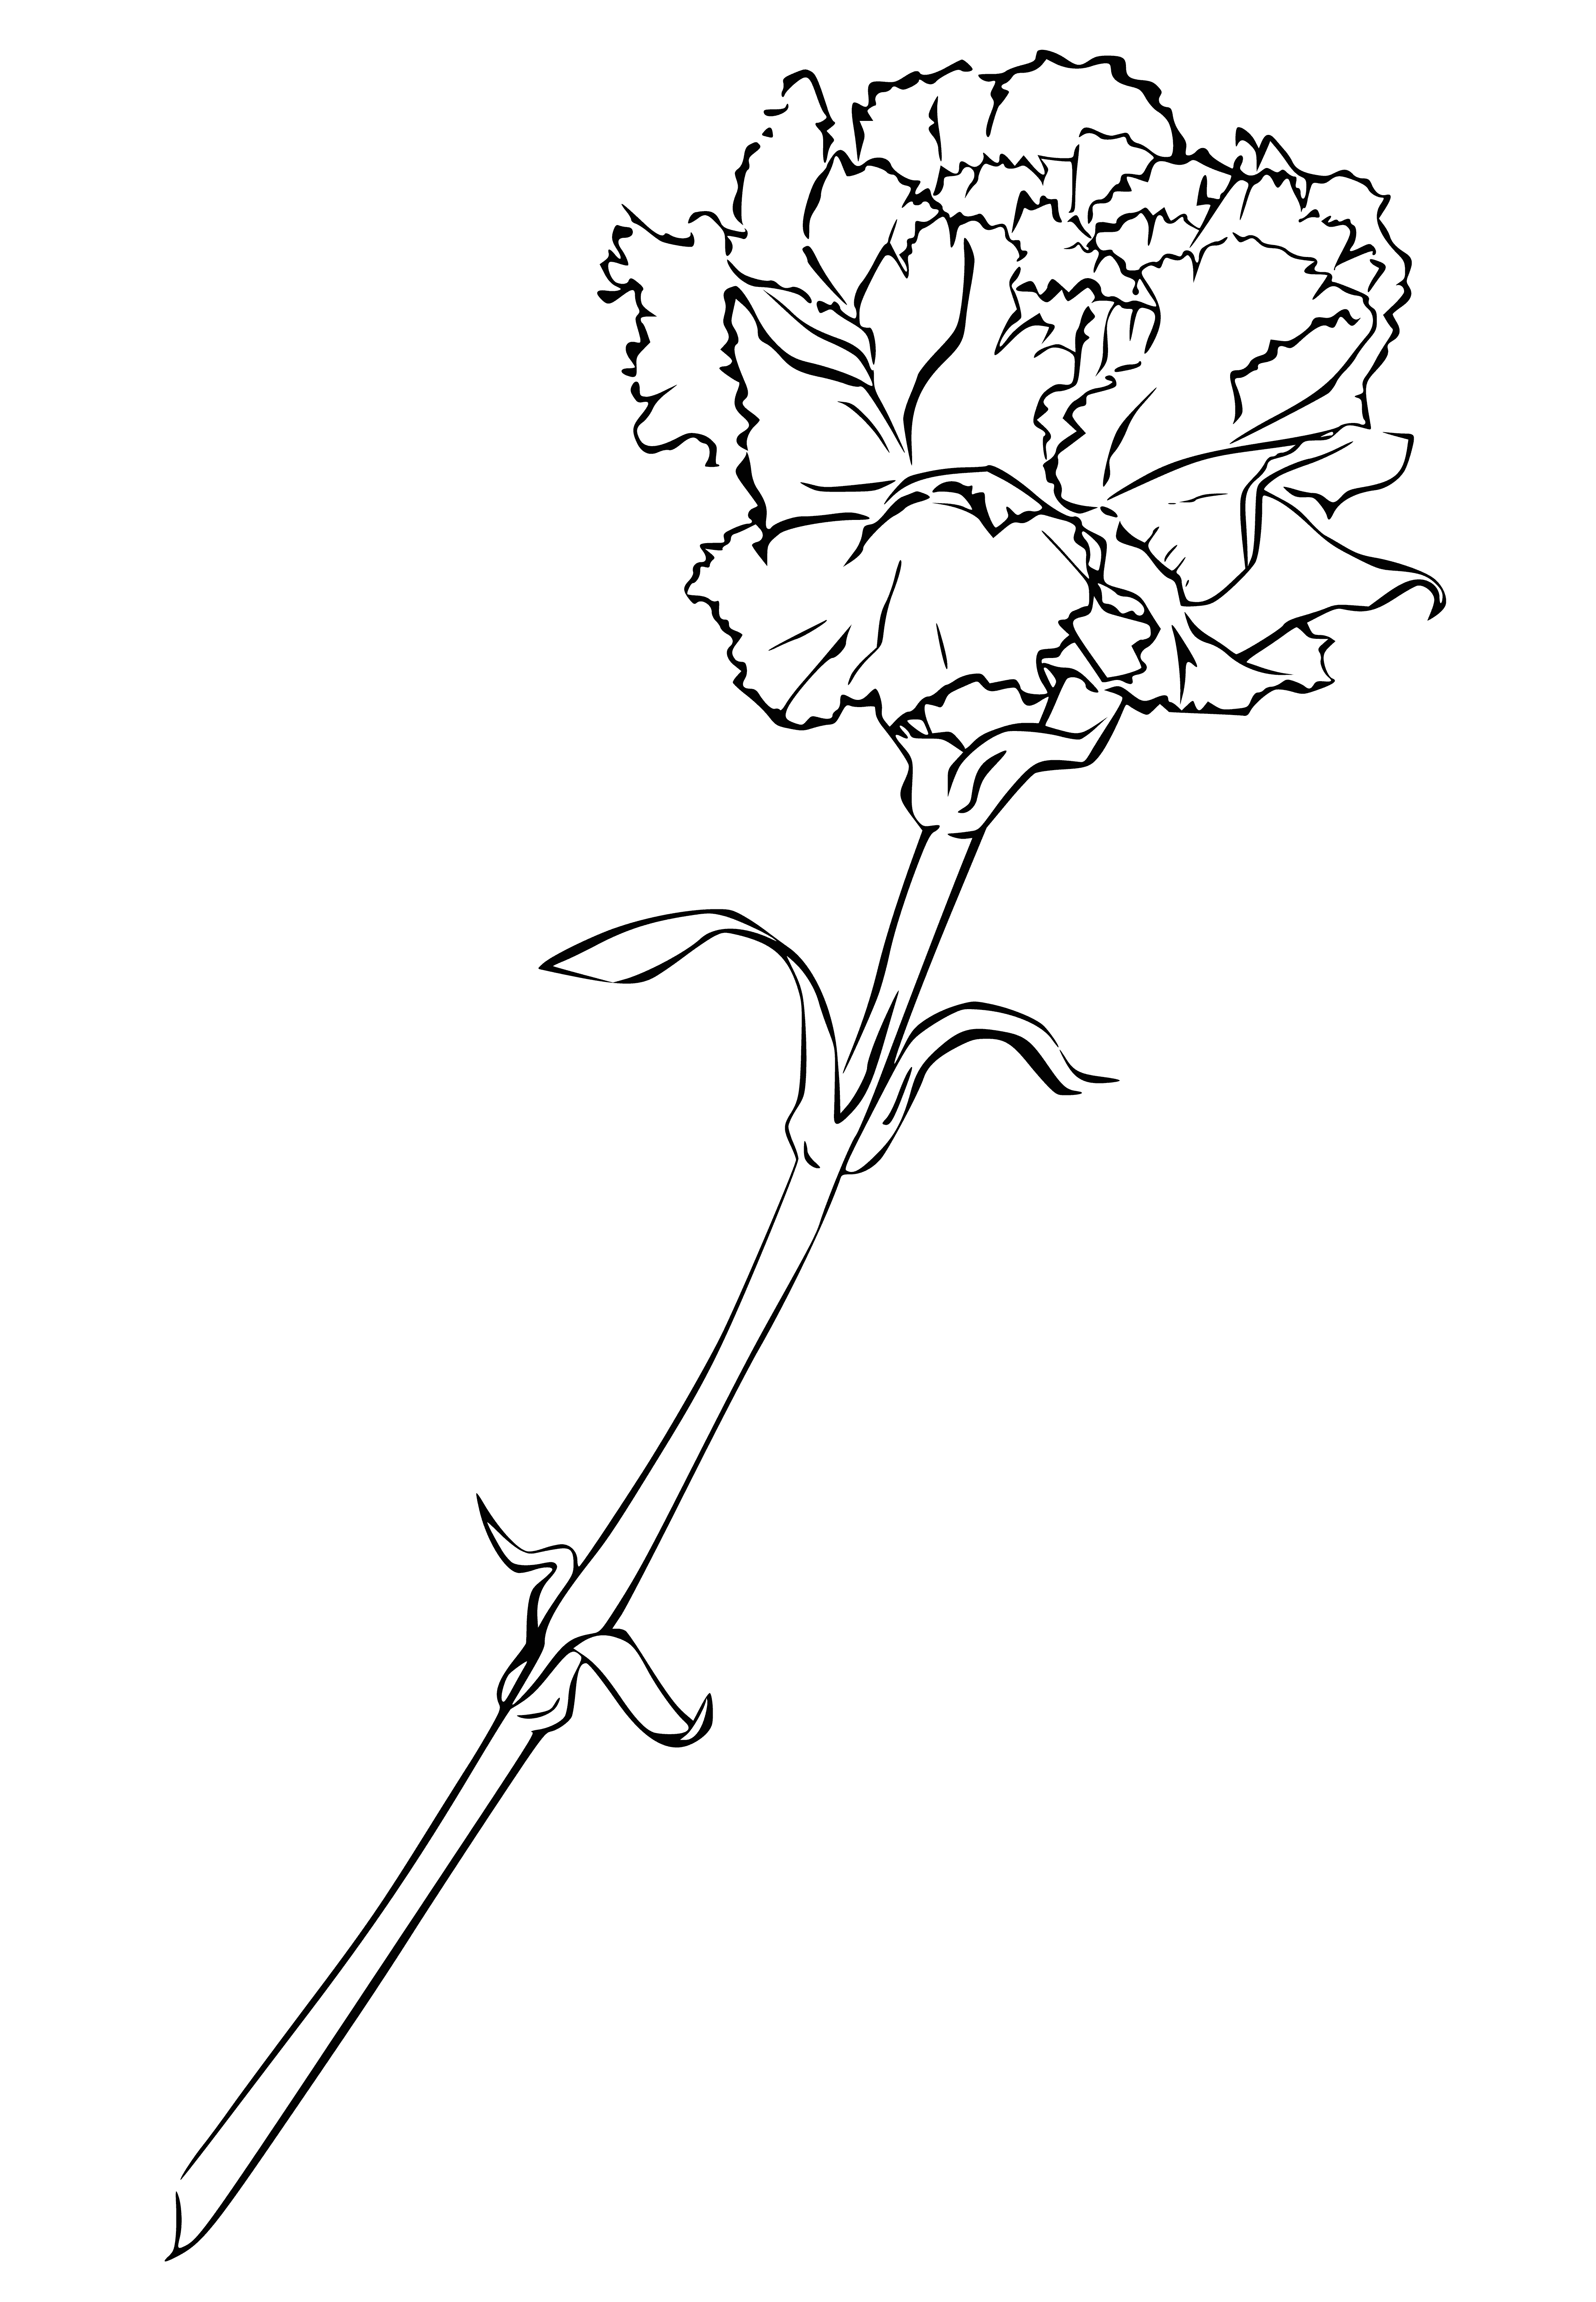 coloring page: A Carnation is a pink flower with a long stem and pointy petals of varying shades of pink, with a yellow center.